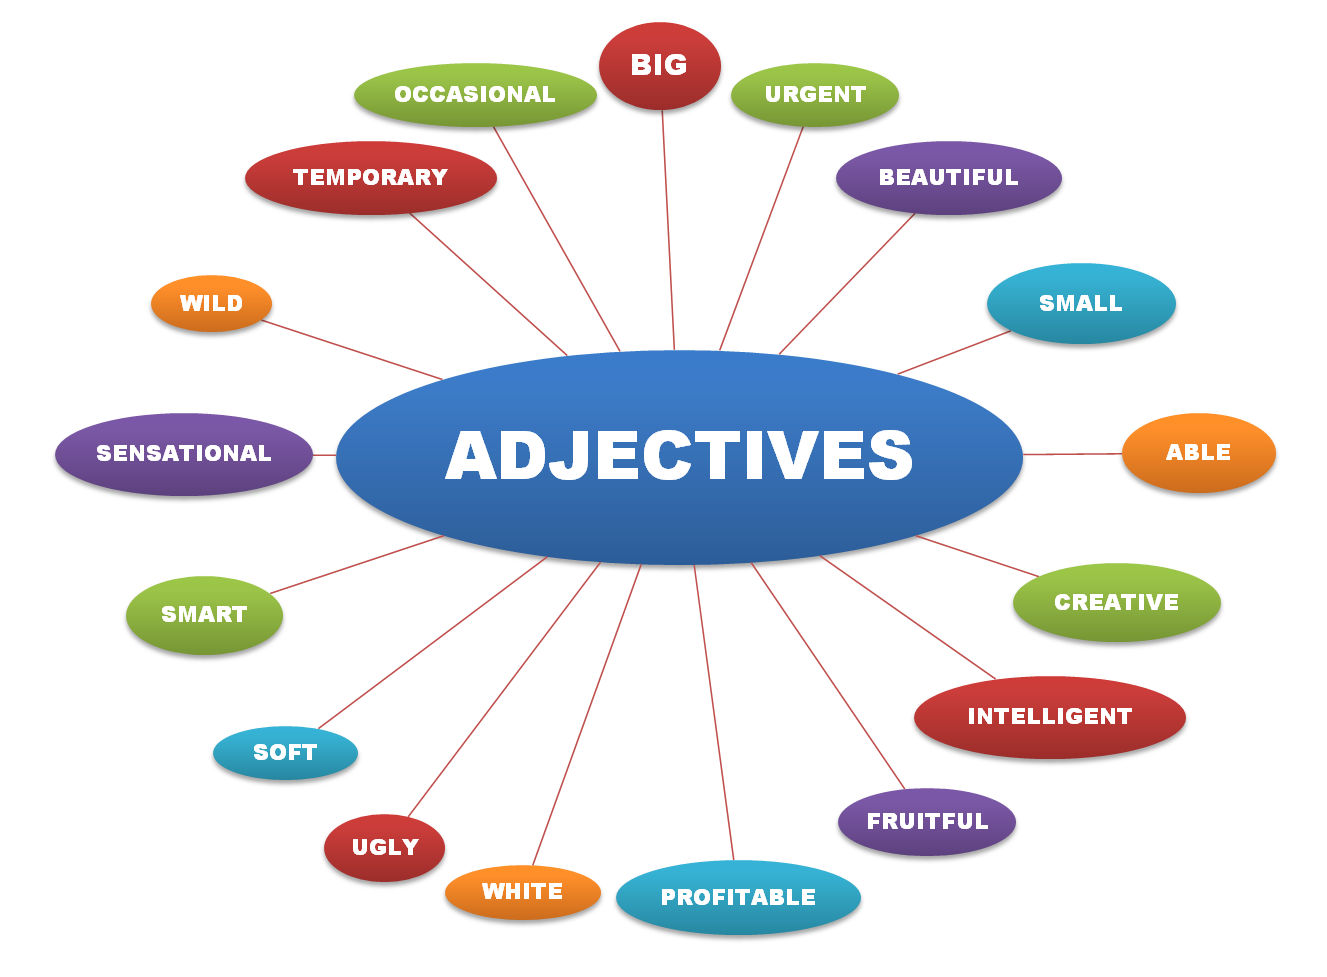 ADJECTIVES - THE QUALIFIERS